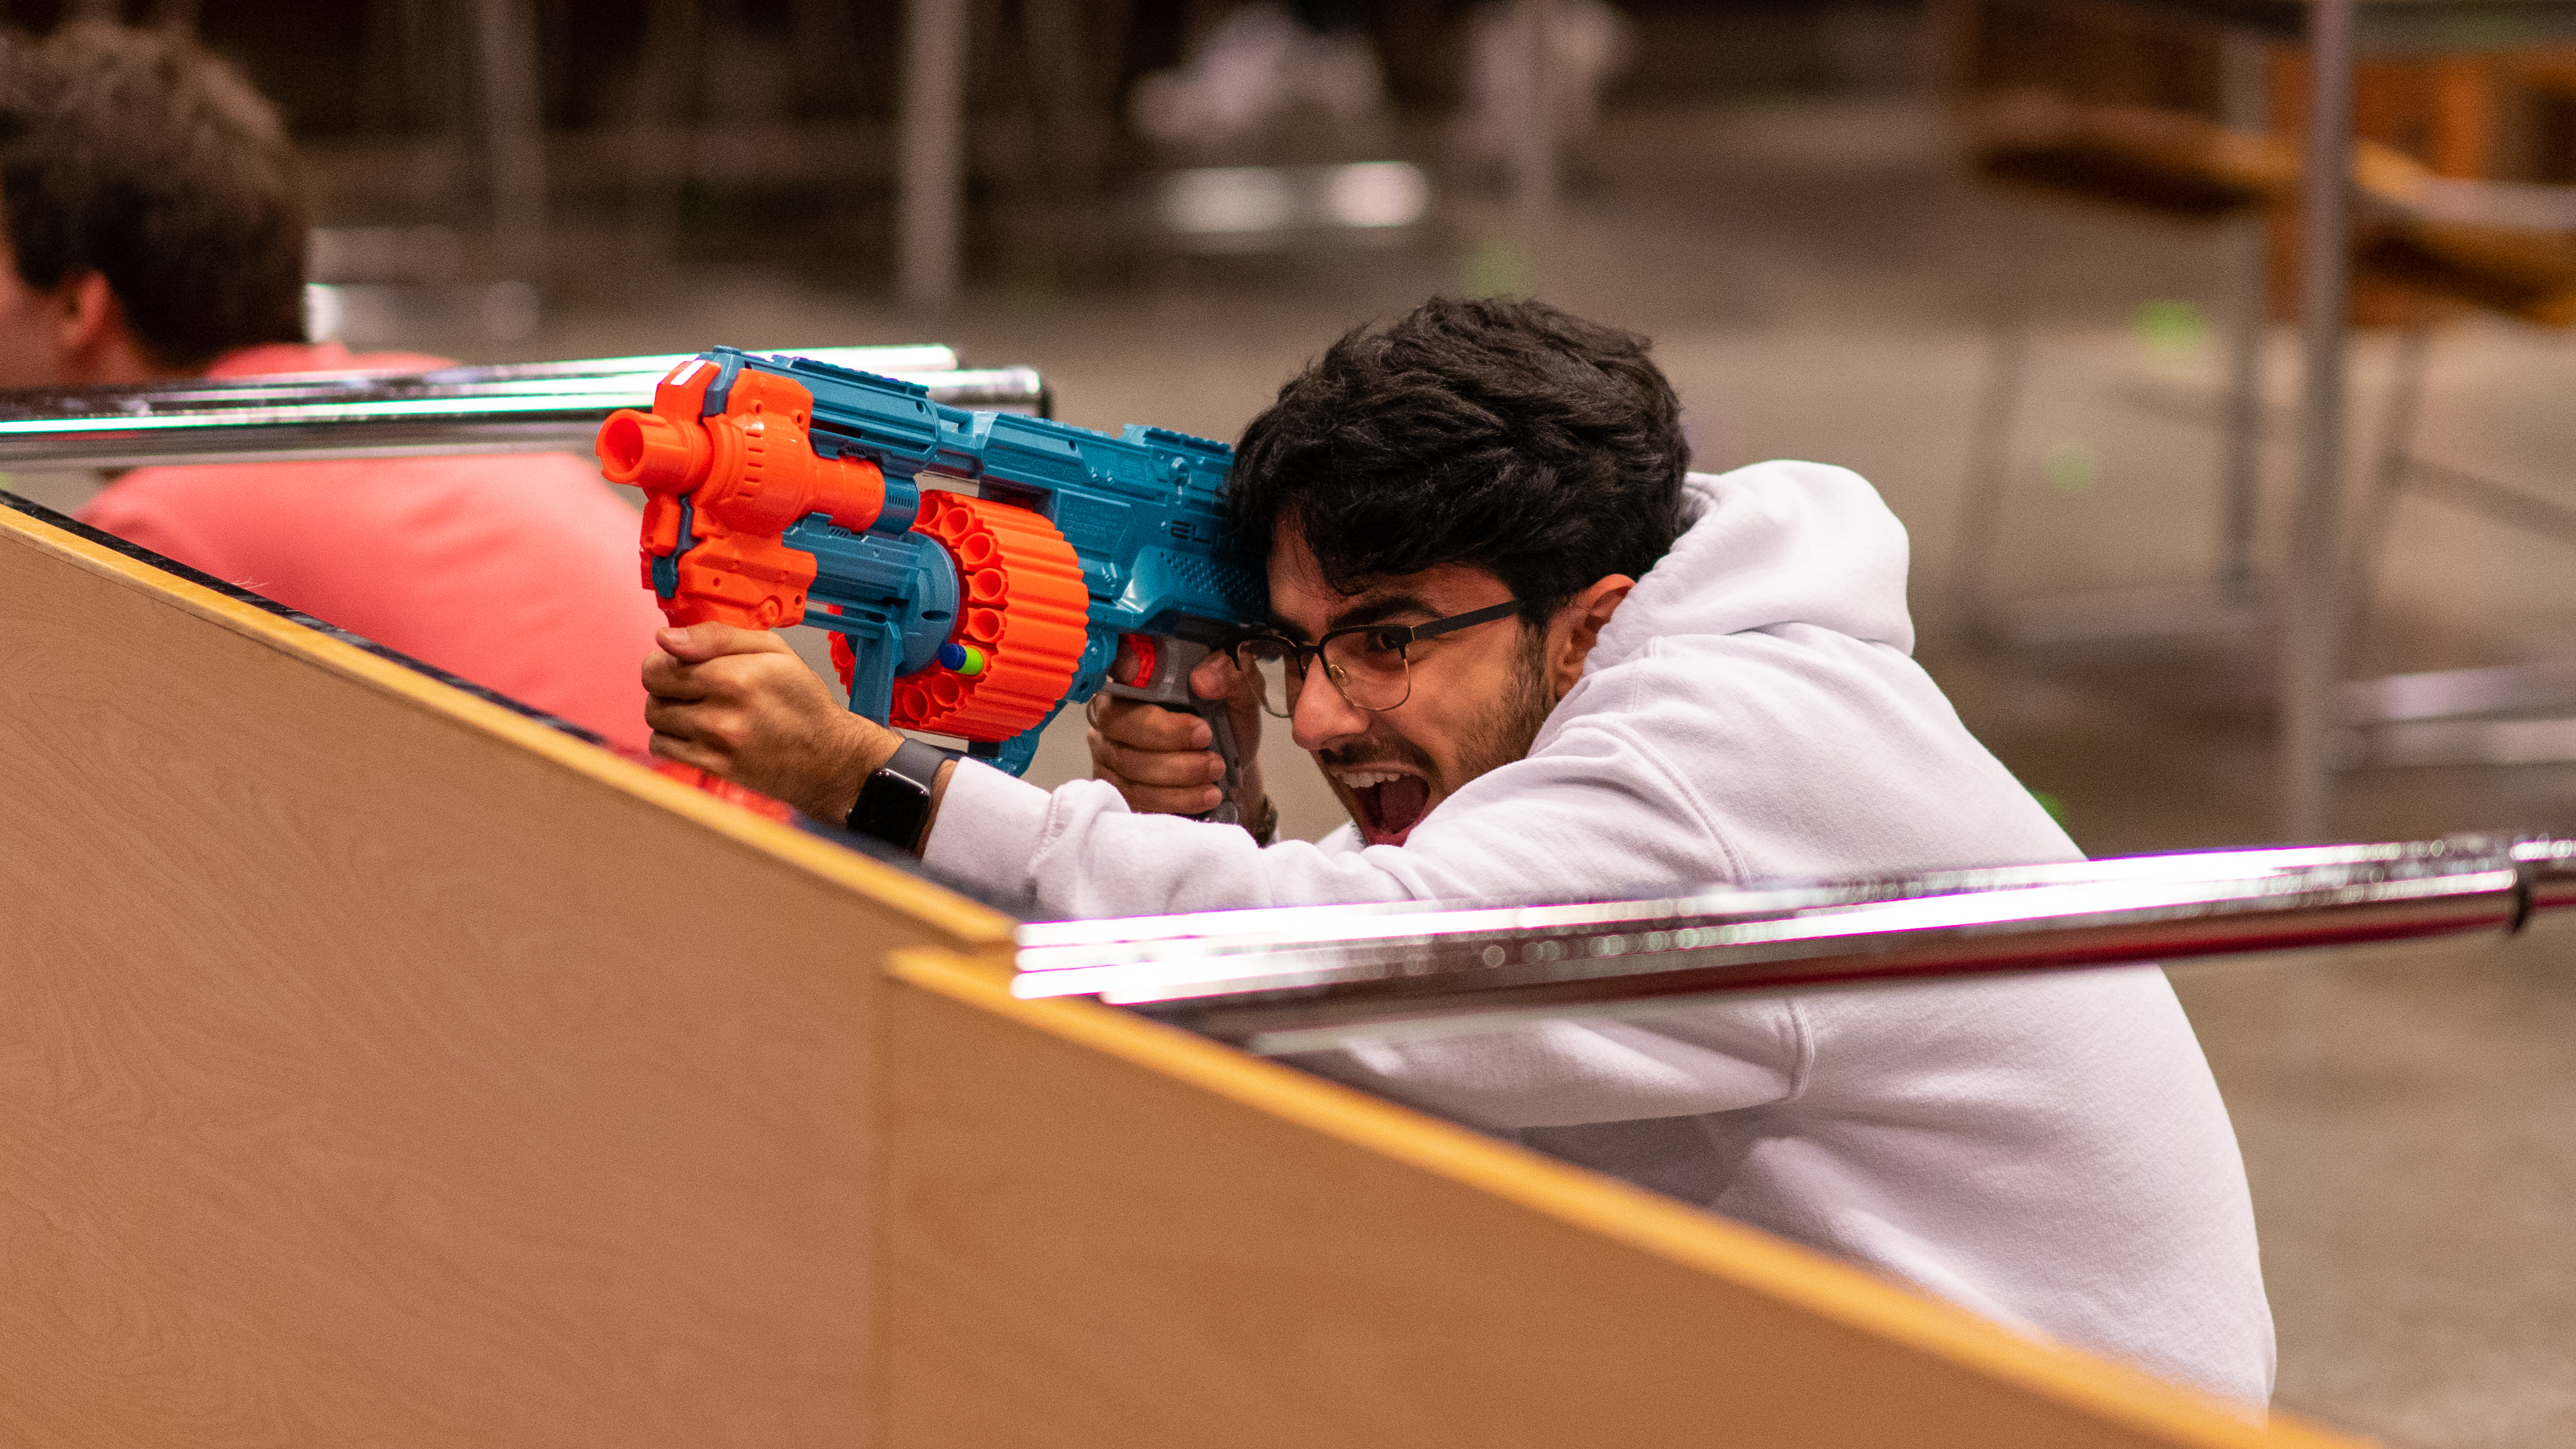 A male student holding an orange and turquoise nerf weapon near the left side of his face while crouching behind a table that has been flipped to its side.